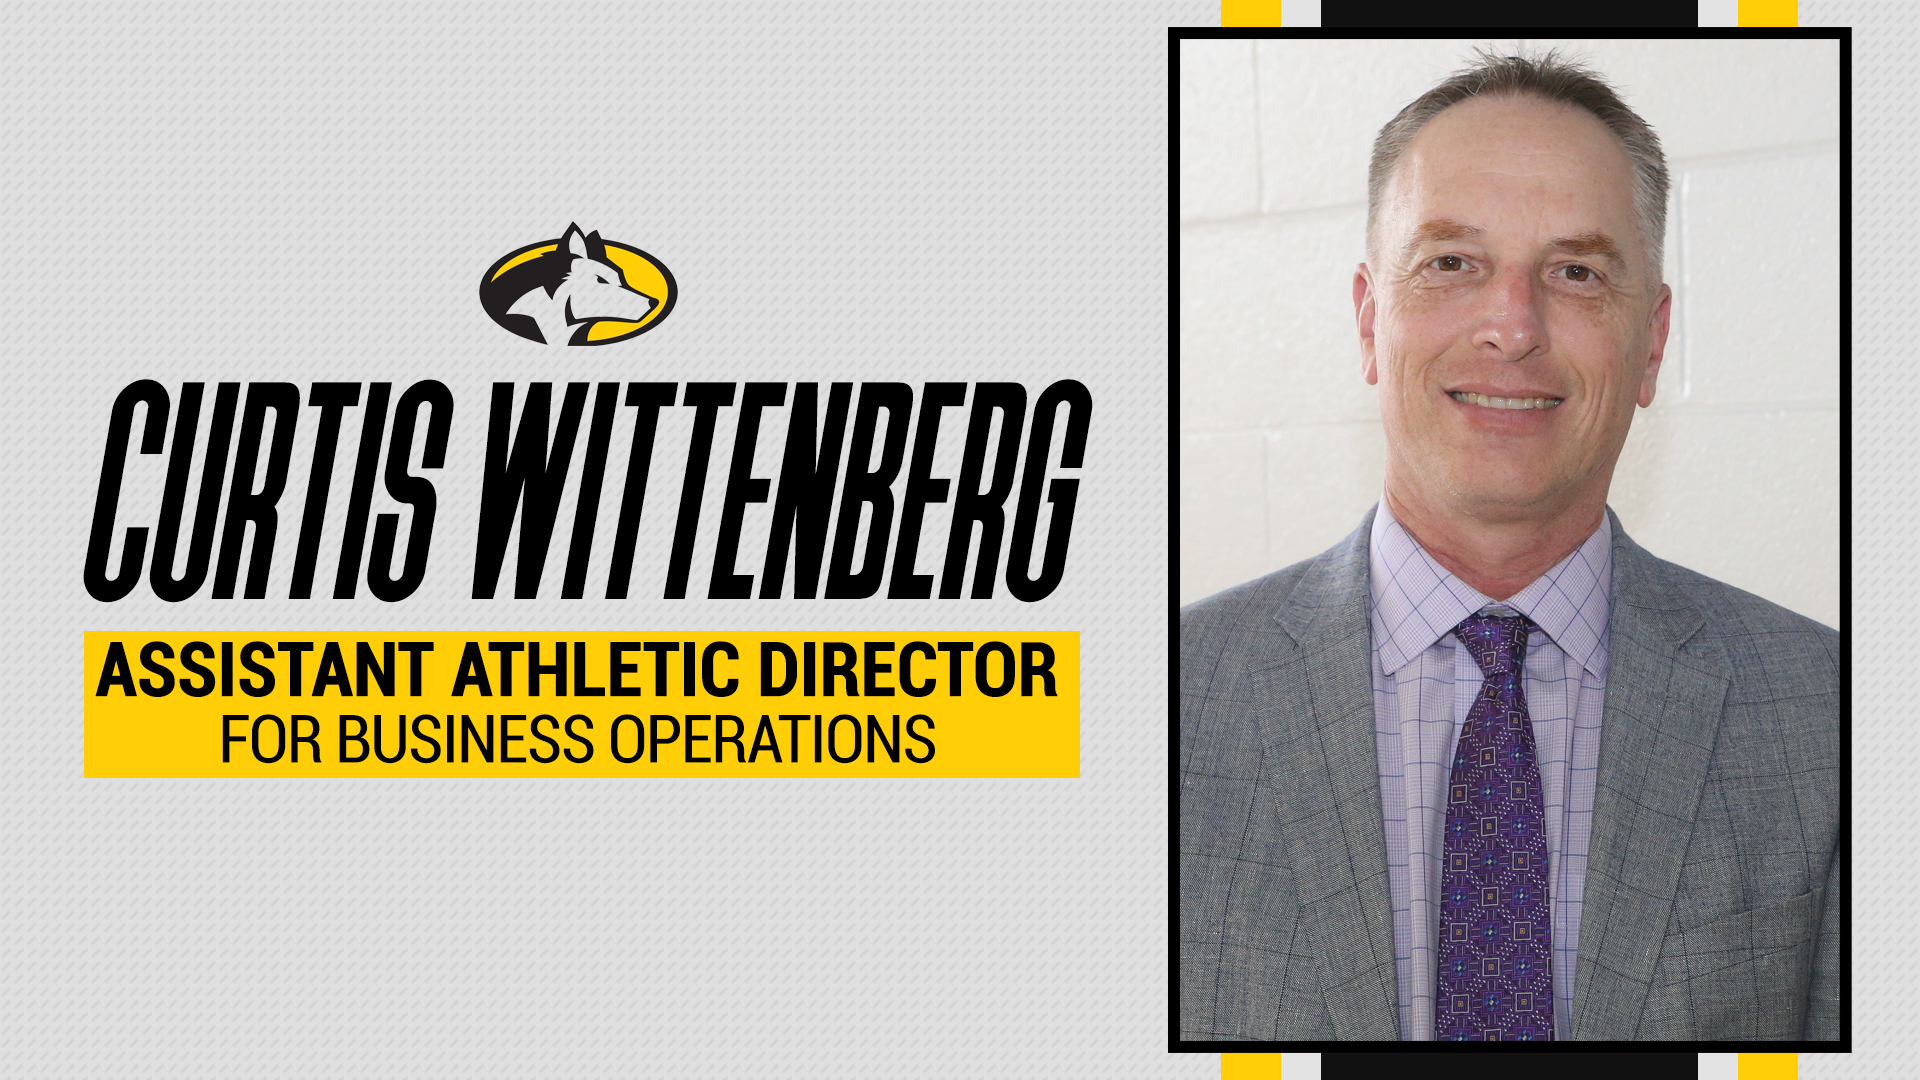 Wittenberg named Assistant AD for Business Operations at Tech